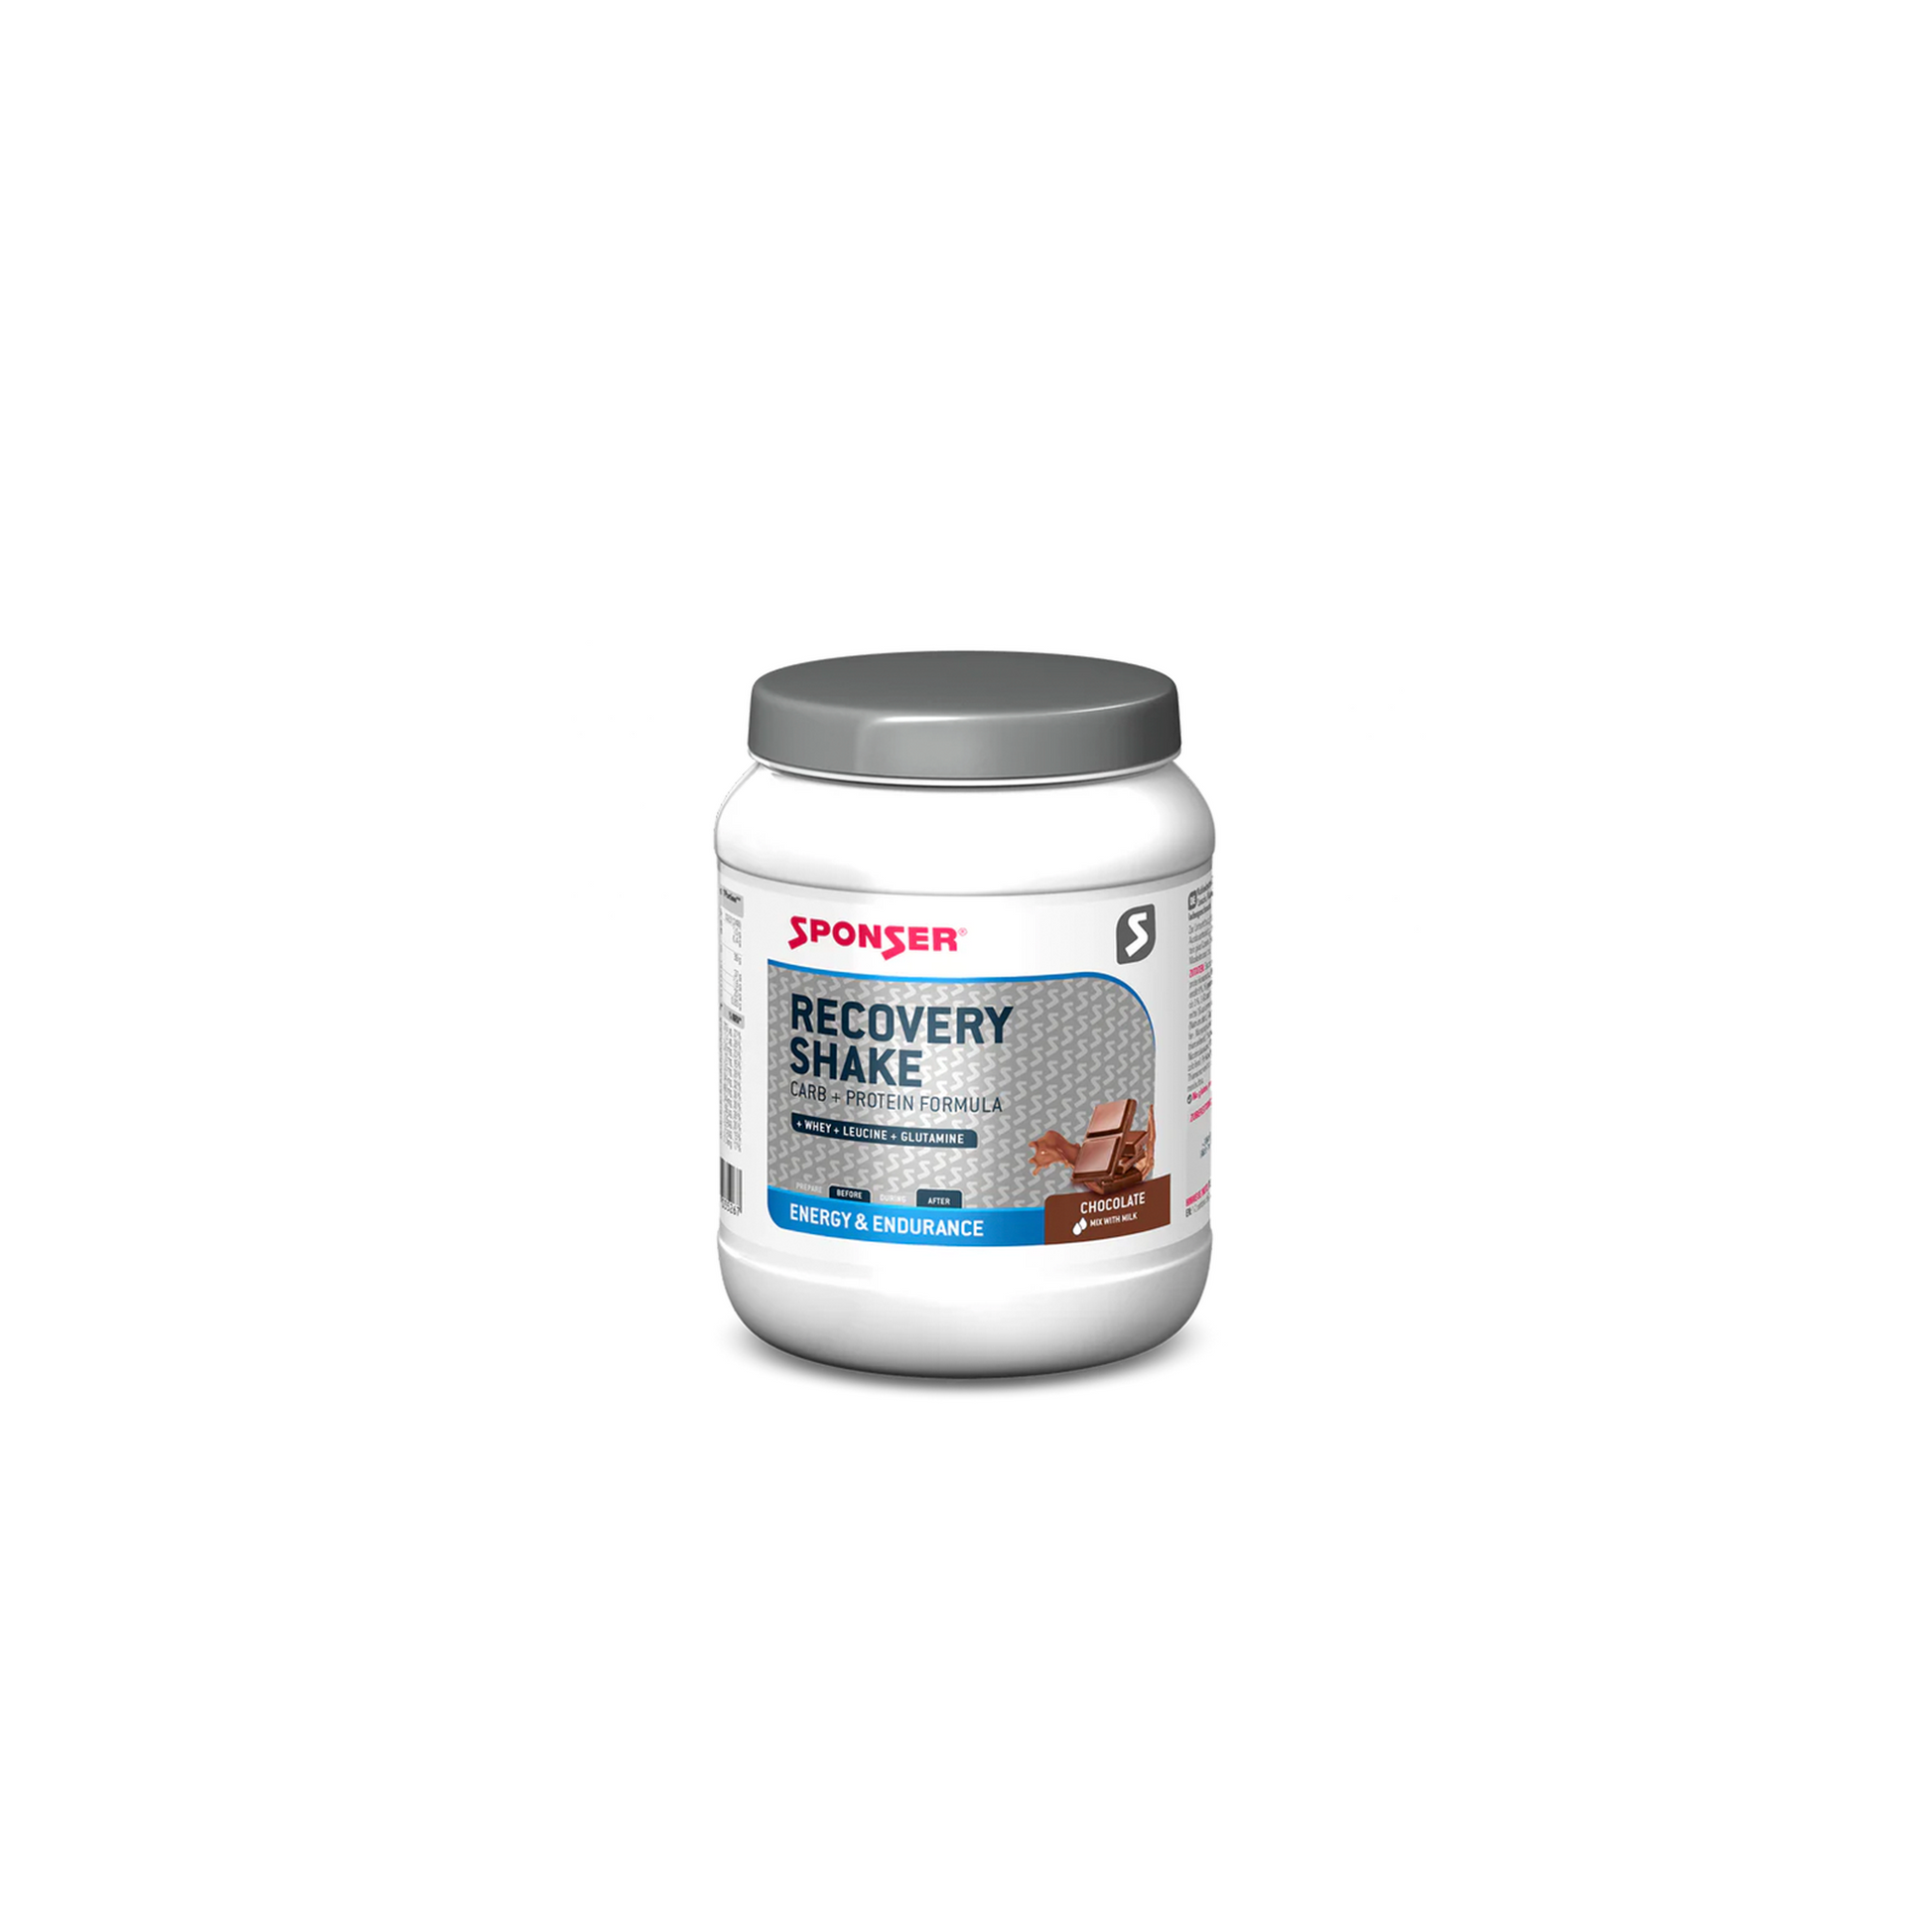 Sponser Recovery Shake - 900g | Complete Cyclist - RECOVERY SHAKE by Sponser® is an "all-in-one" regeneration shake after hard training sessions in strength and endurance sports. 